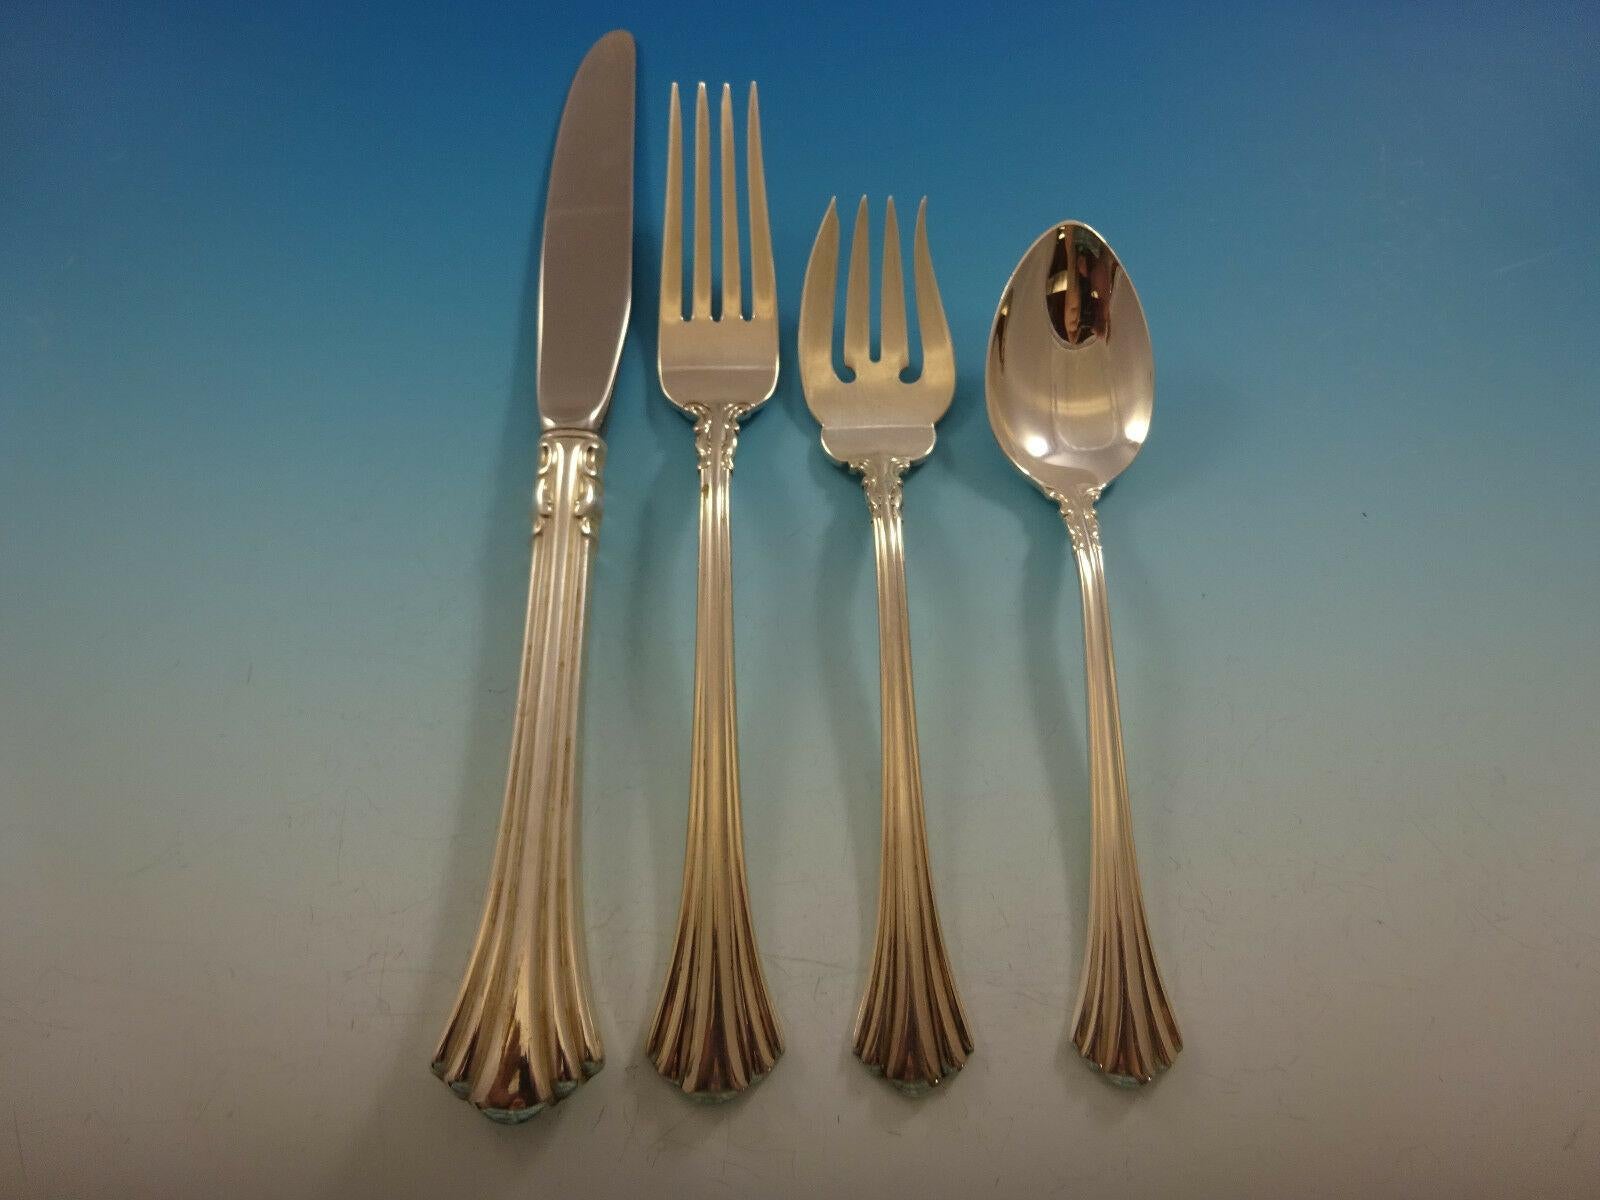 Gorgeous 18th century by Reed & Barton sterling silver flatware set- 57 pieces. This set includes:

12 knives, 9